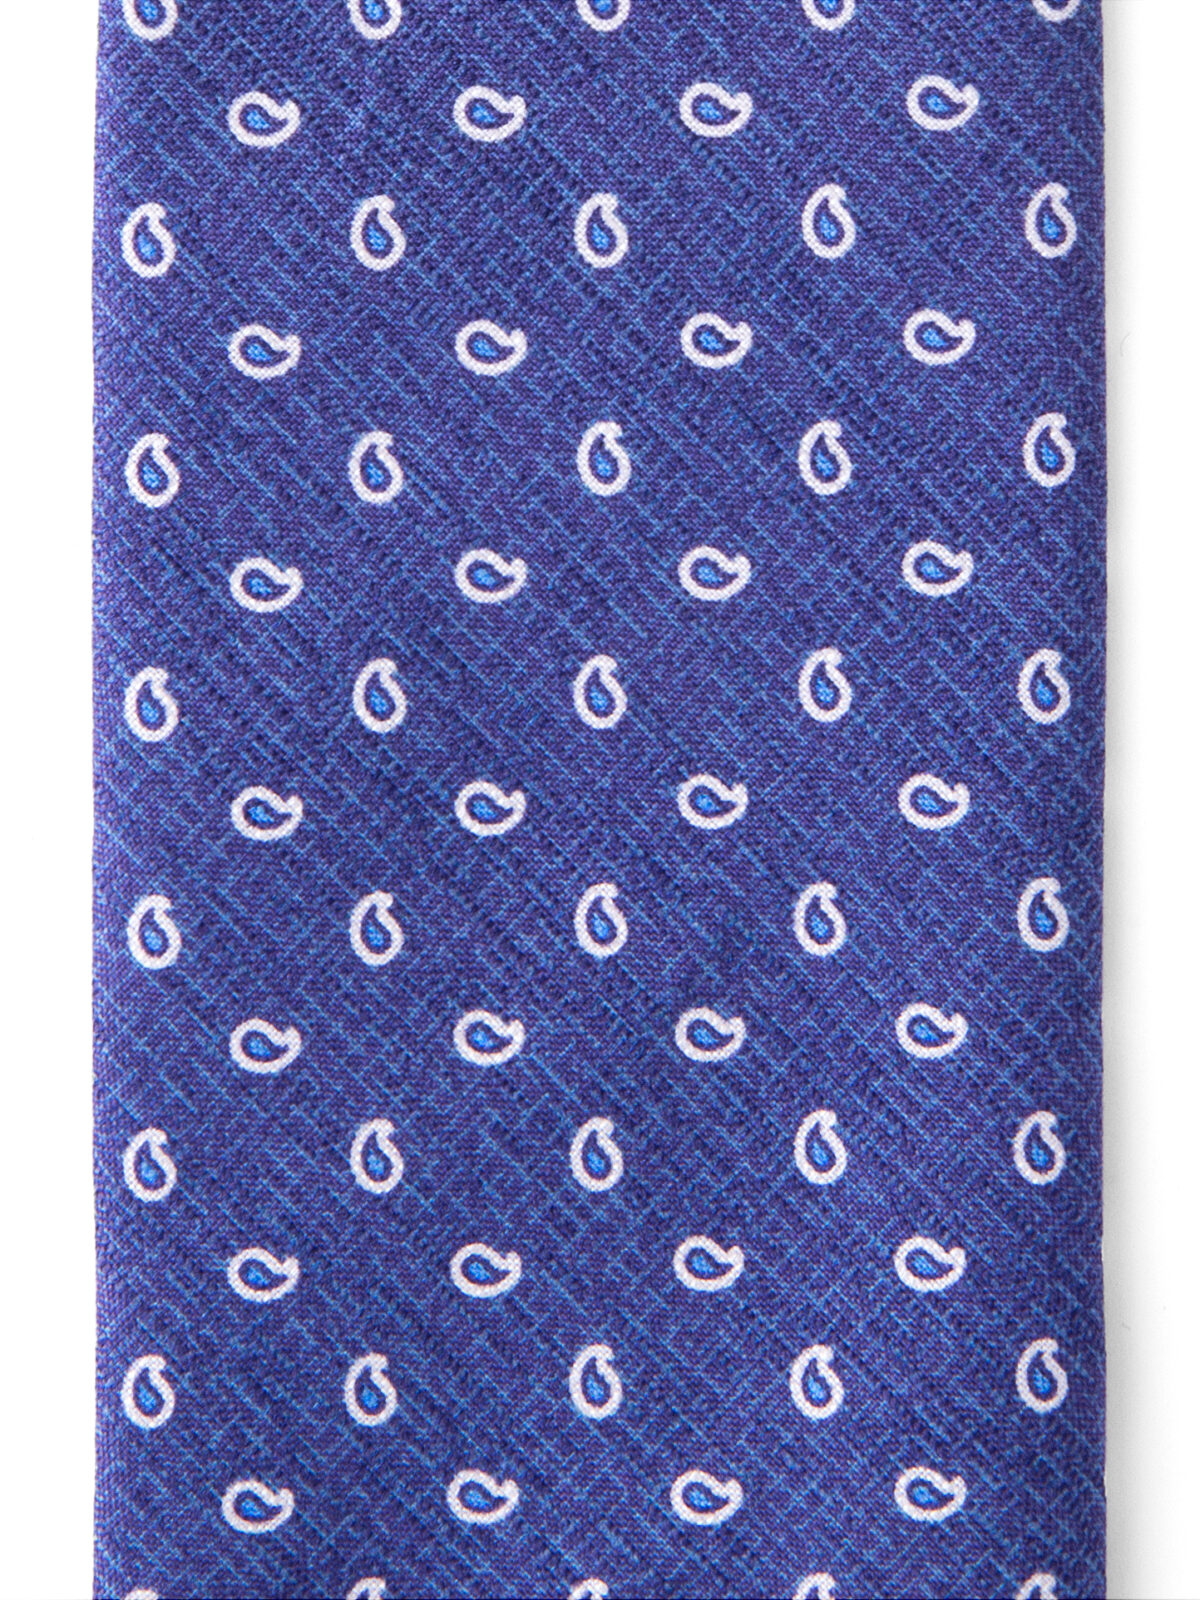 Olmo Blue and White Paisley Print Tie